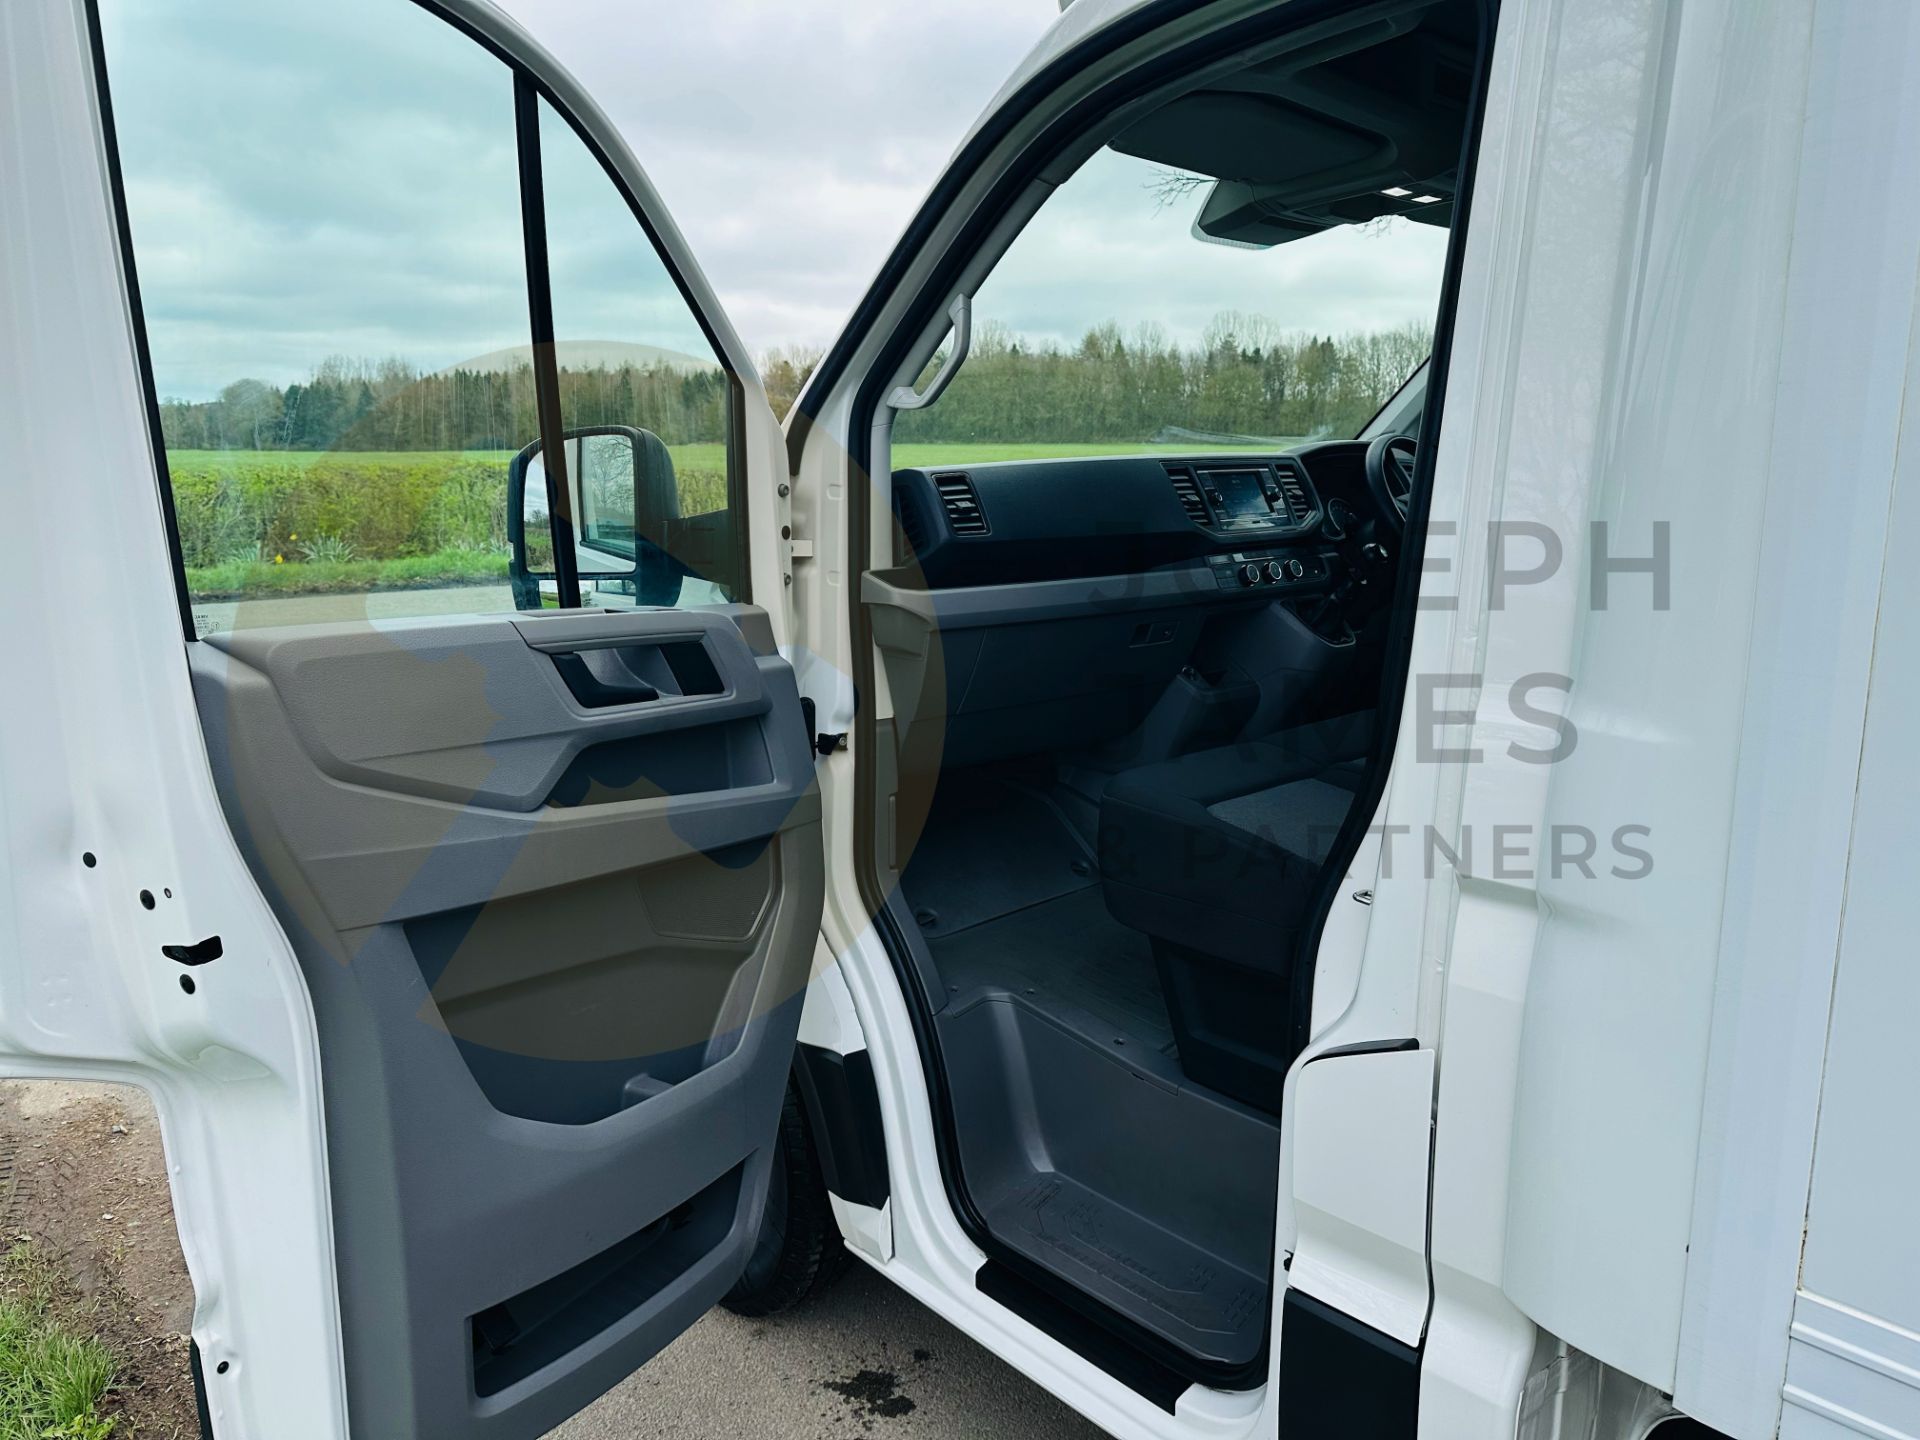 VOLKSWAGEN CRAFTER 2.0 TDI (140) LWB LUTON WITH TAIL LIFT (2021 MODEL) 1 OWNER - LOW MILES - AIR CON - Image 13 of 26